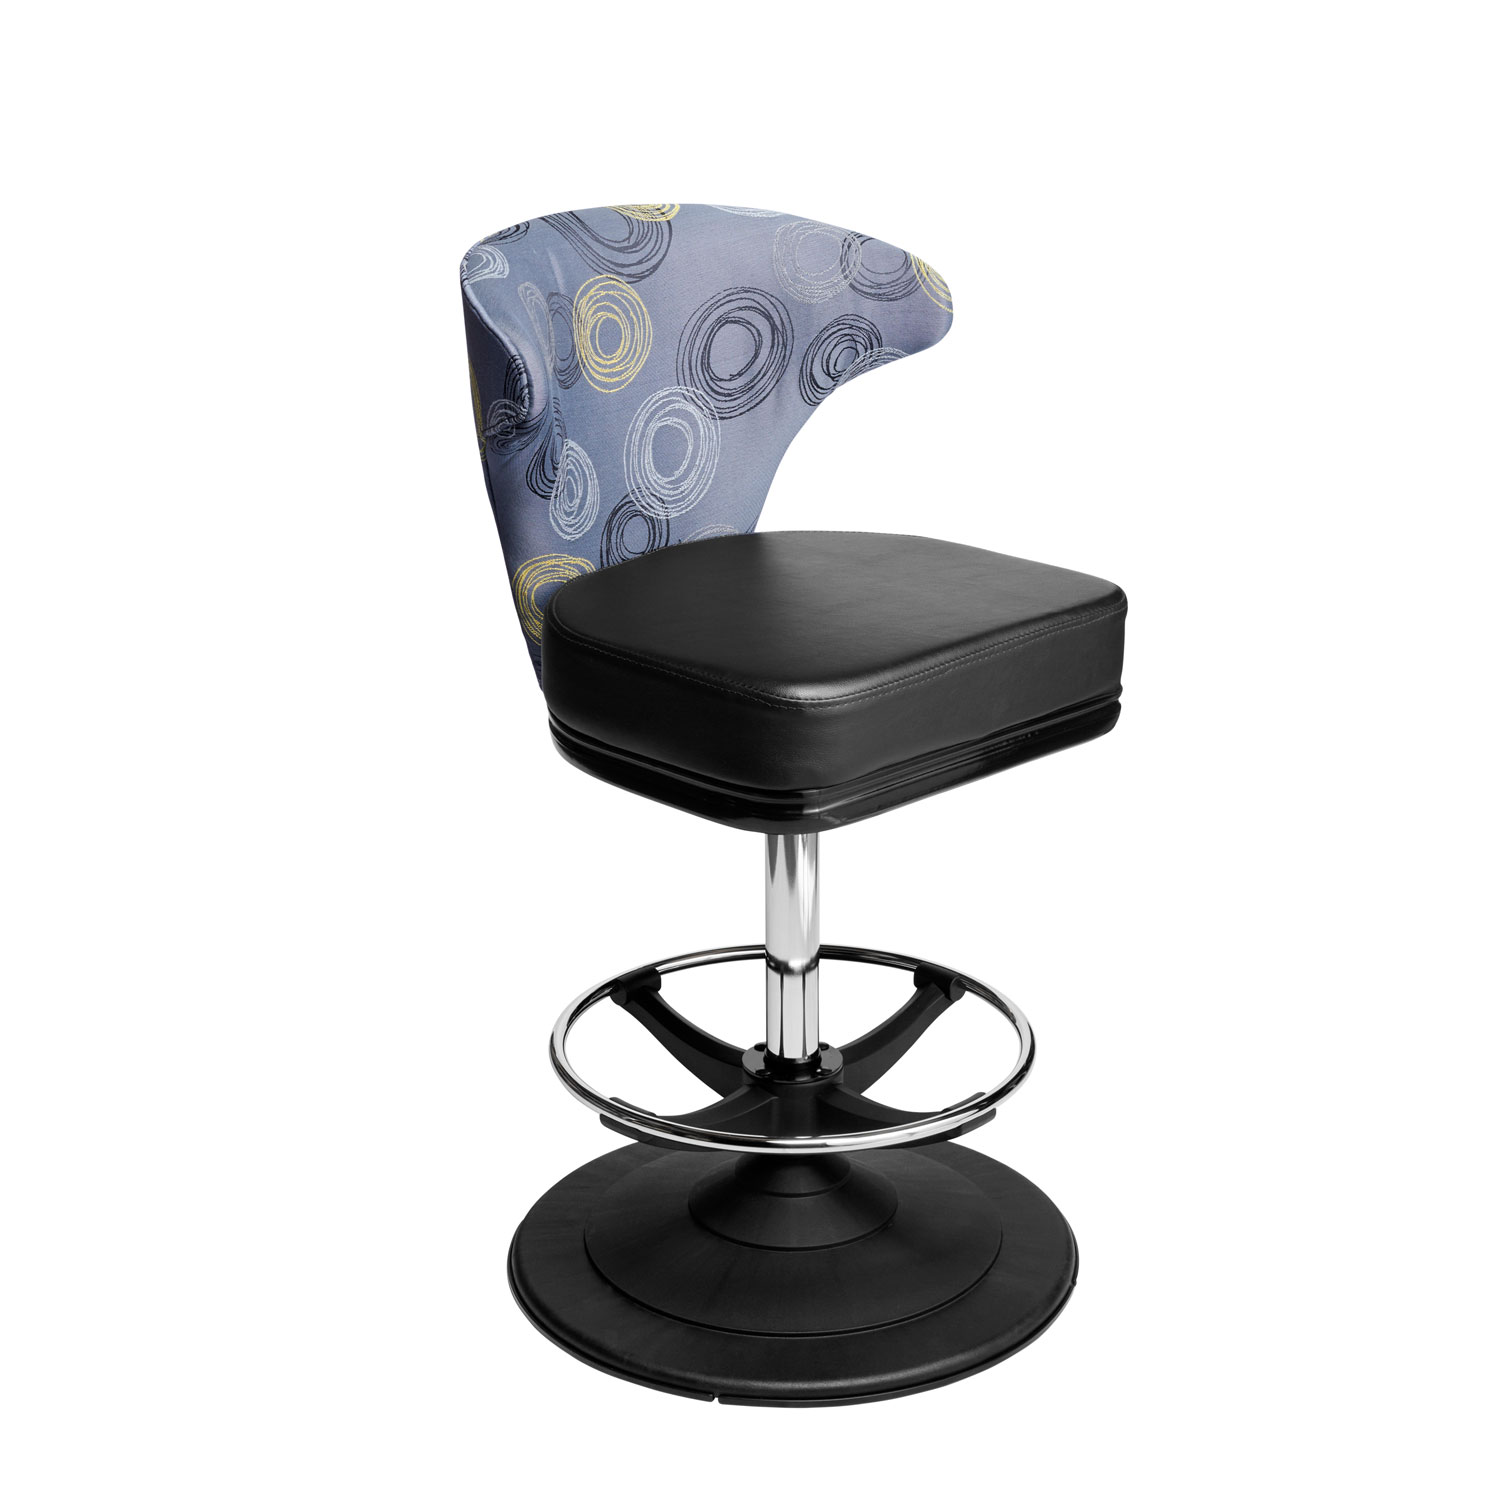 Mercury casino chair and gaming stool can be fitted with gas height adjustment